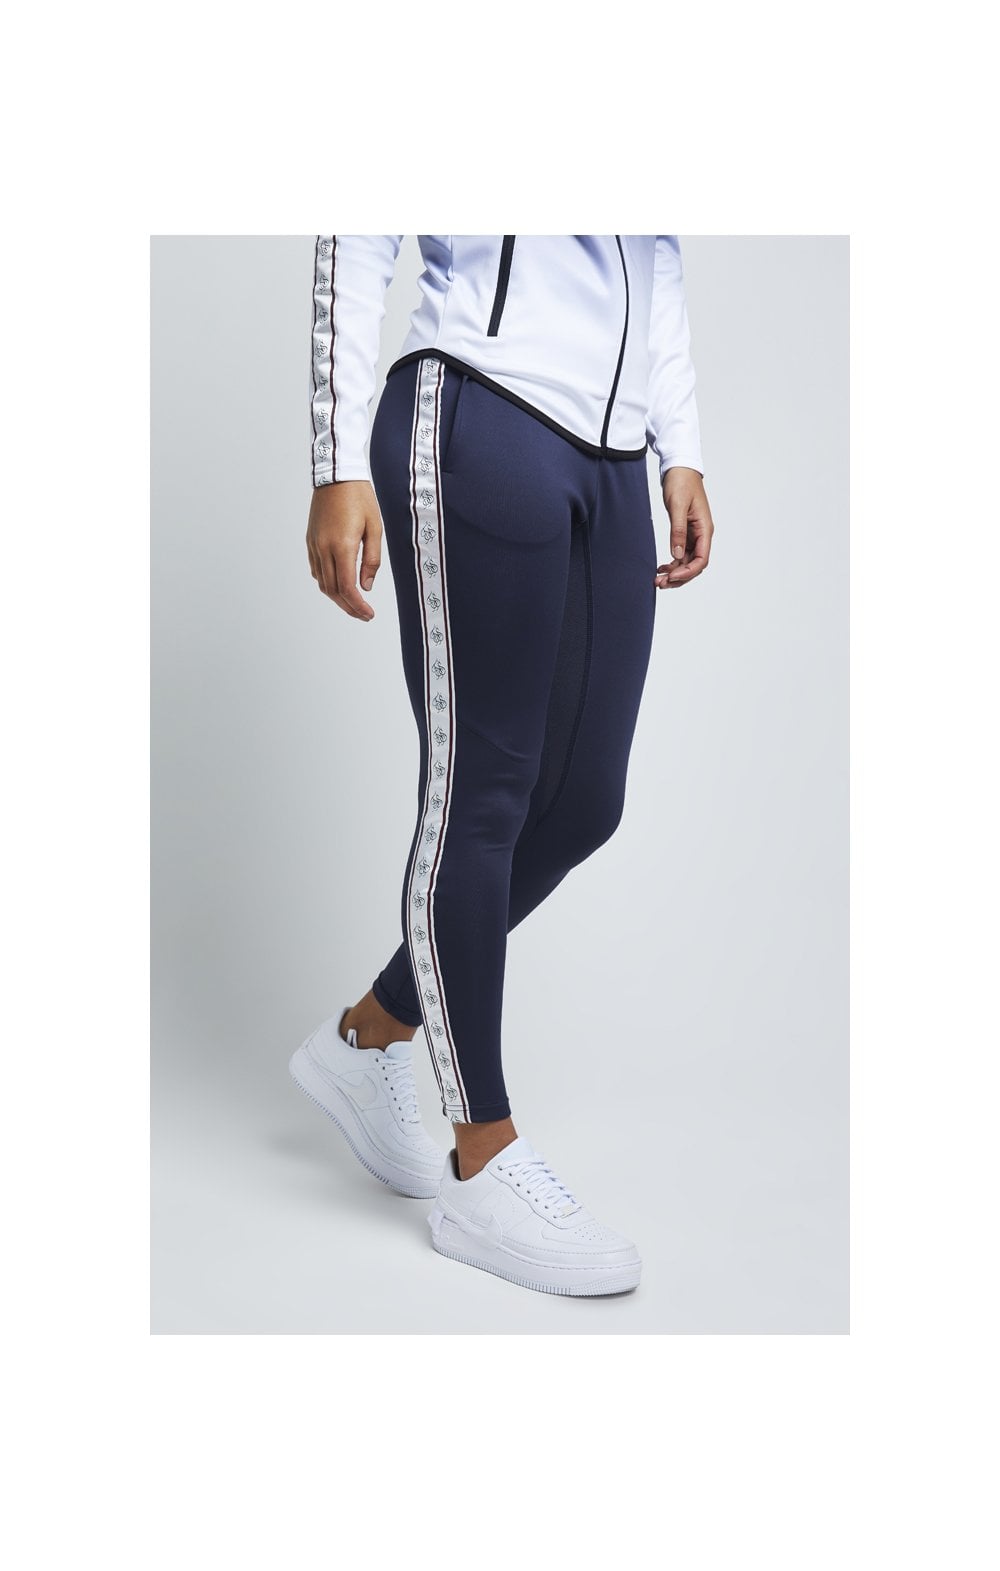 Load image into Gallery viewer, SikSilk Tape Athlete Track Pants - Ebony (3)